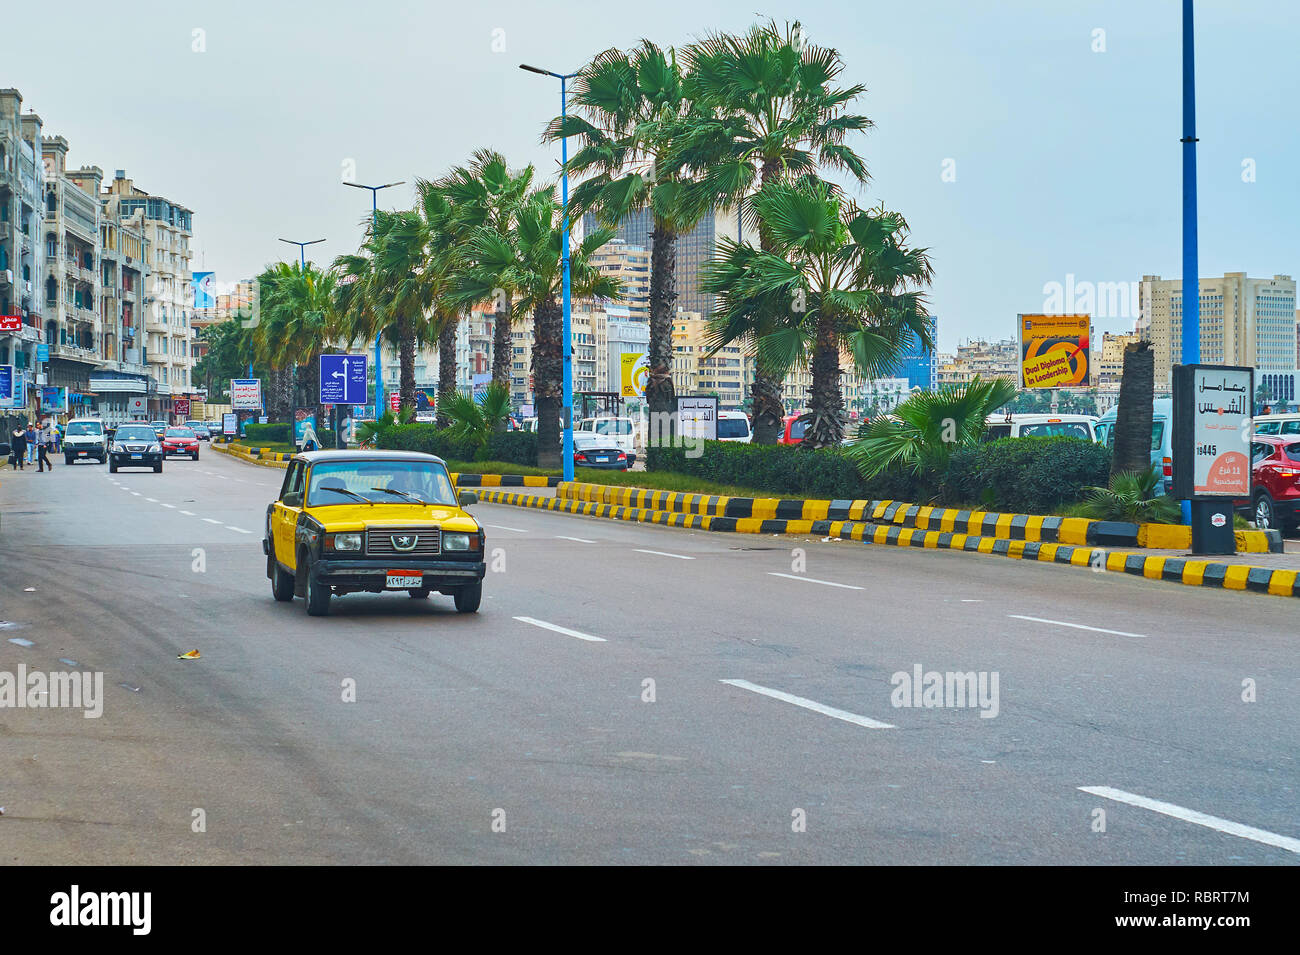 ALEXANDRIA, EGYPT - DECEMBER 19, 2017: The vintage taxi drives along the Corniche Avenue with a line of green palms on the background, on December 19  Stock Photo